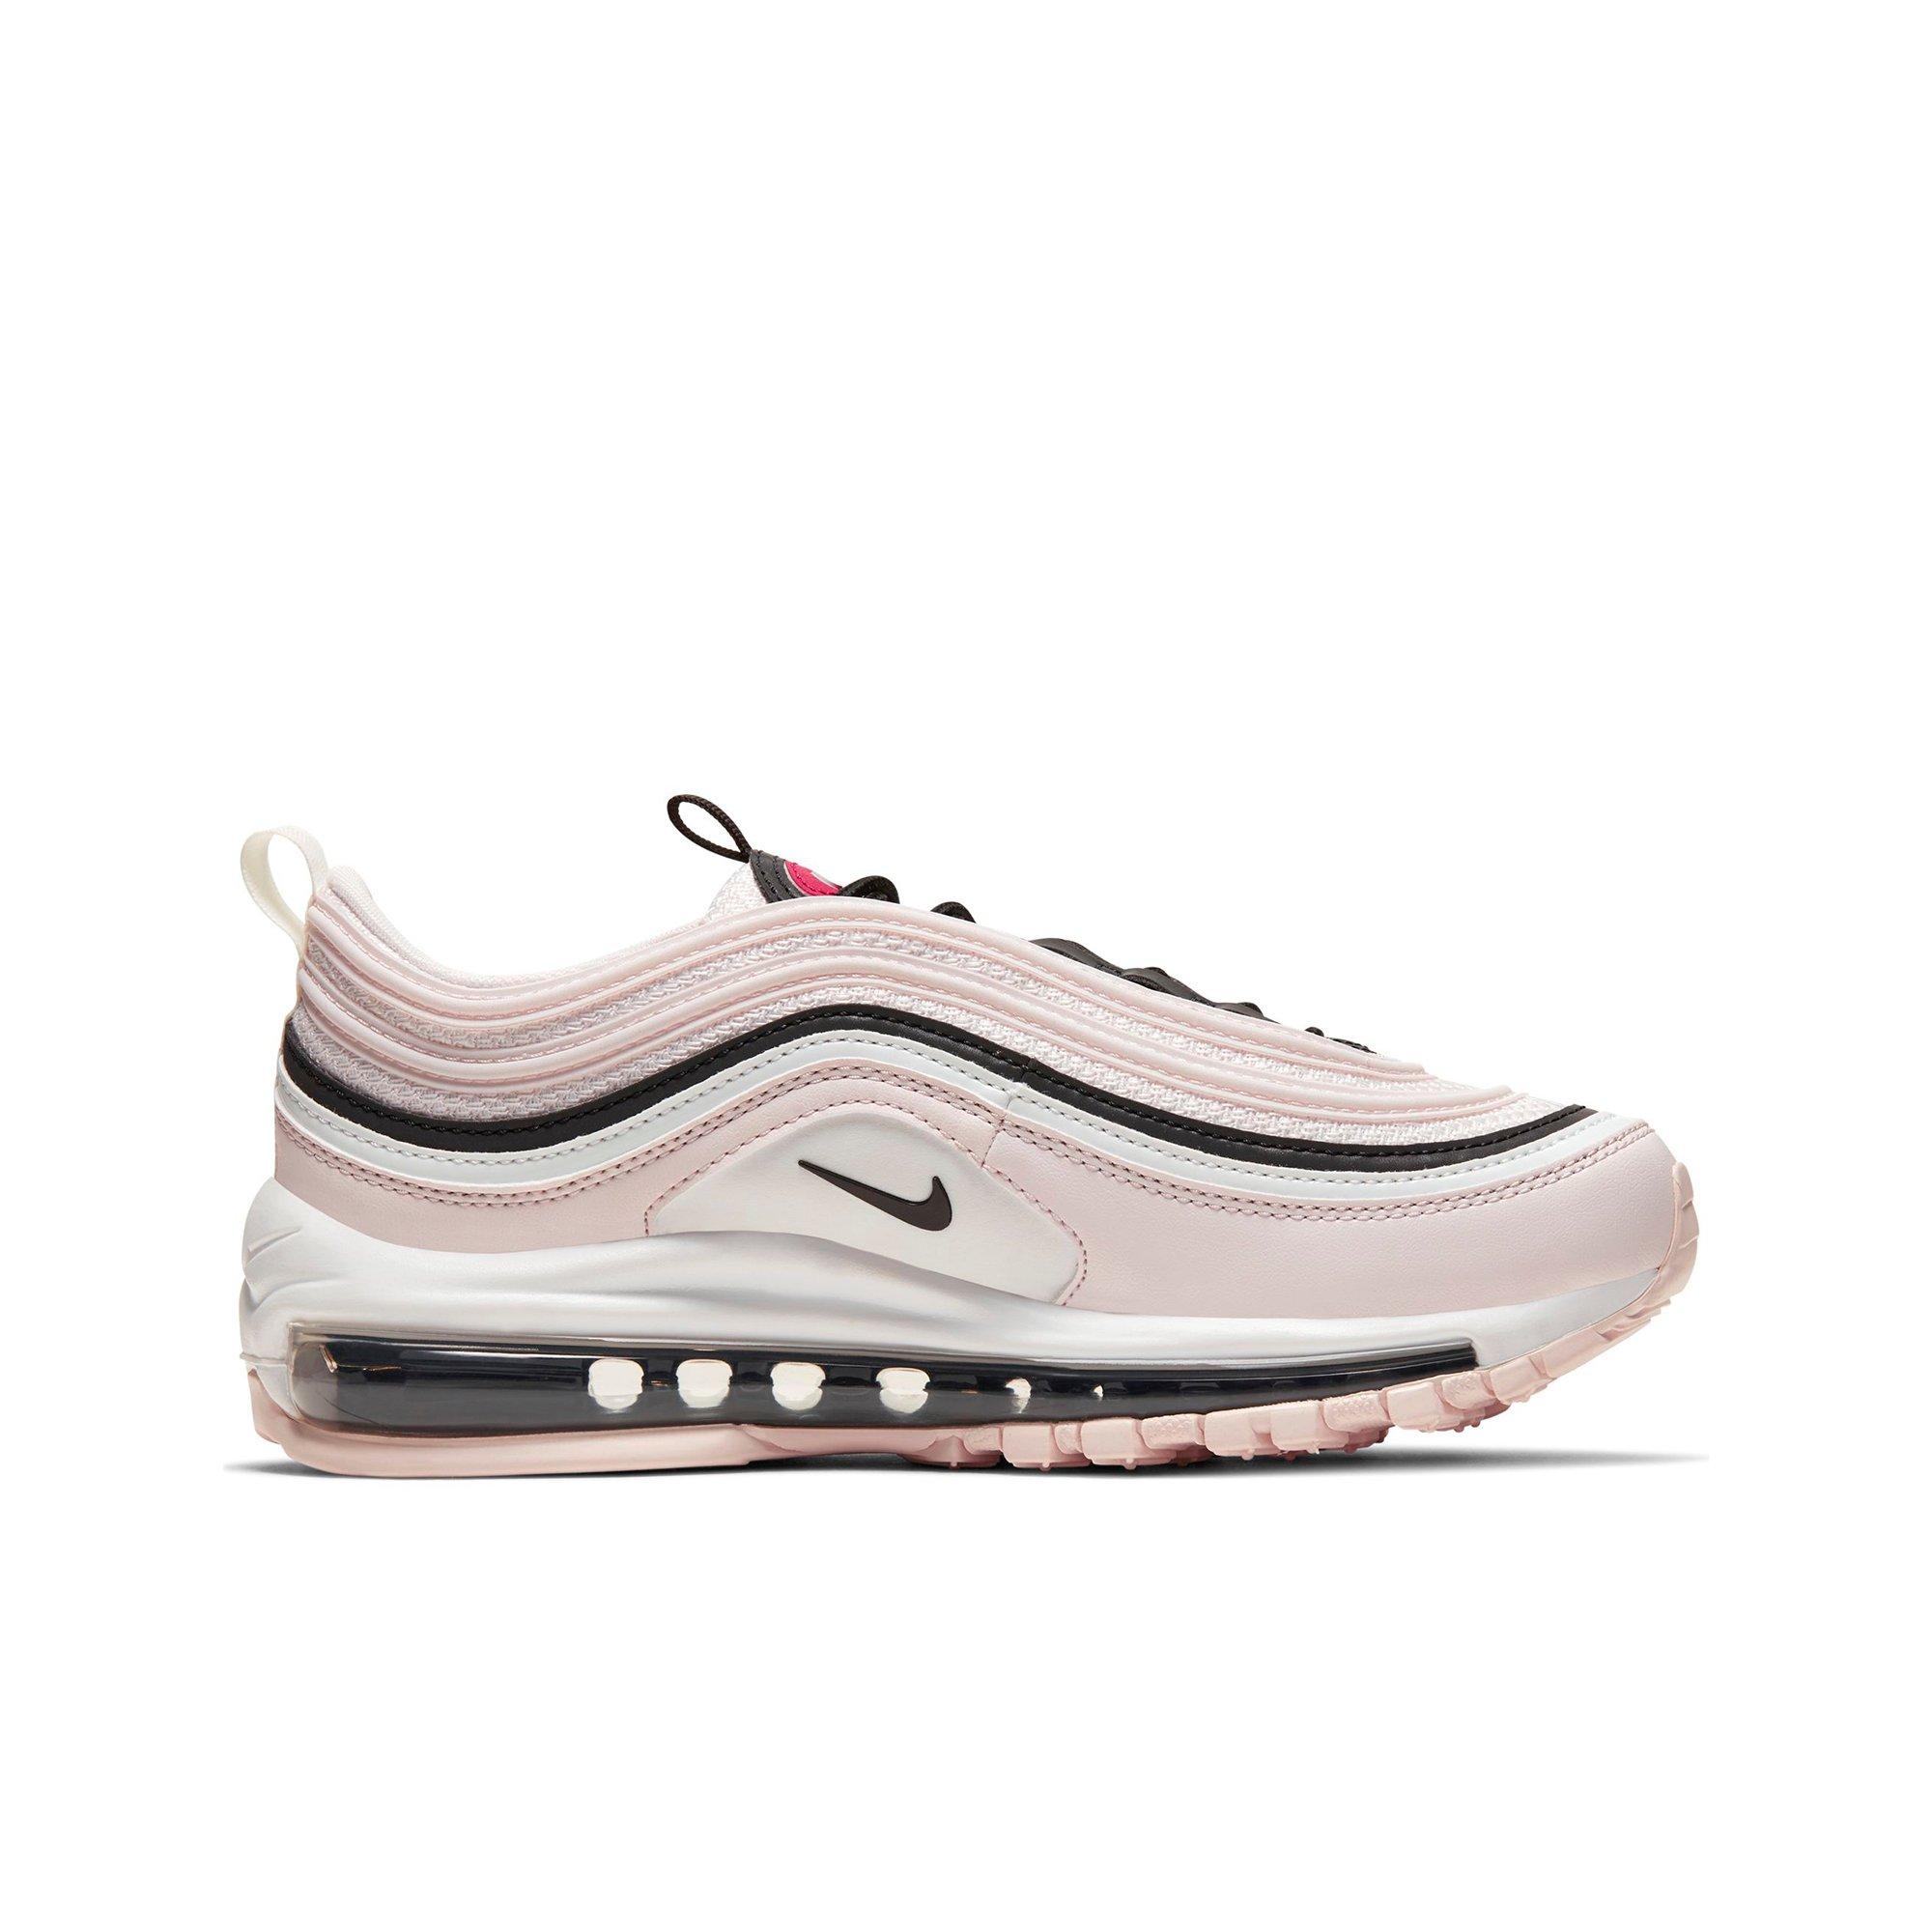 nike 97 black and pink